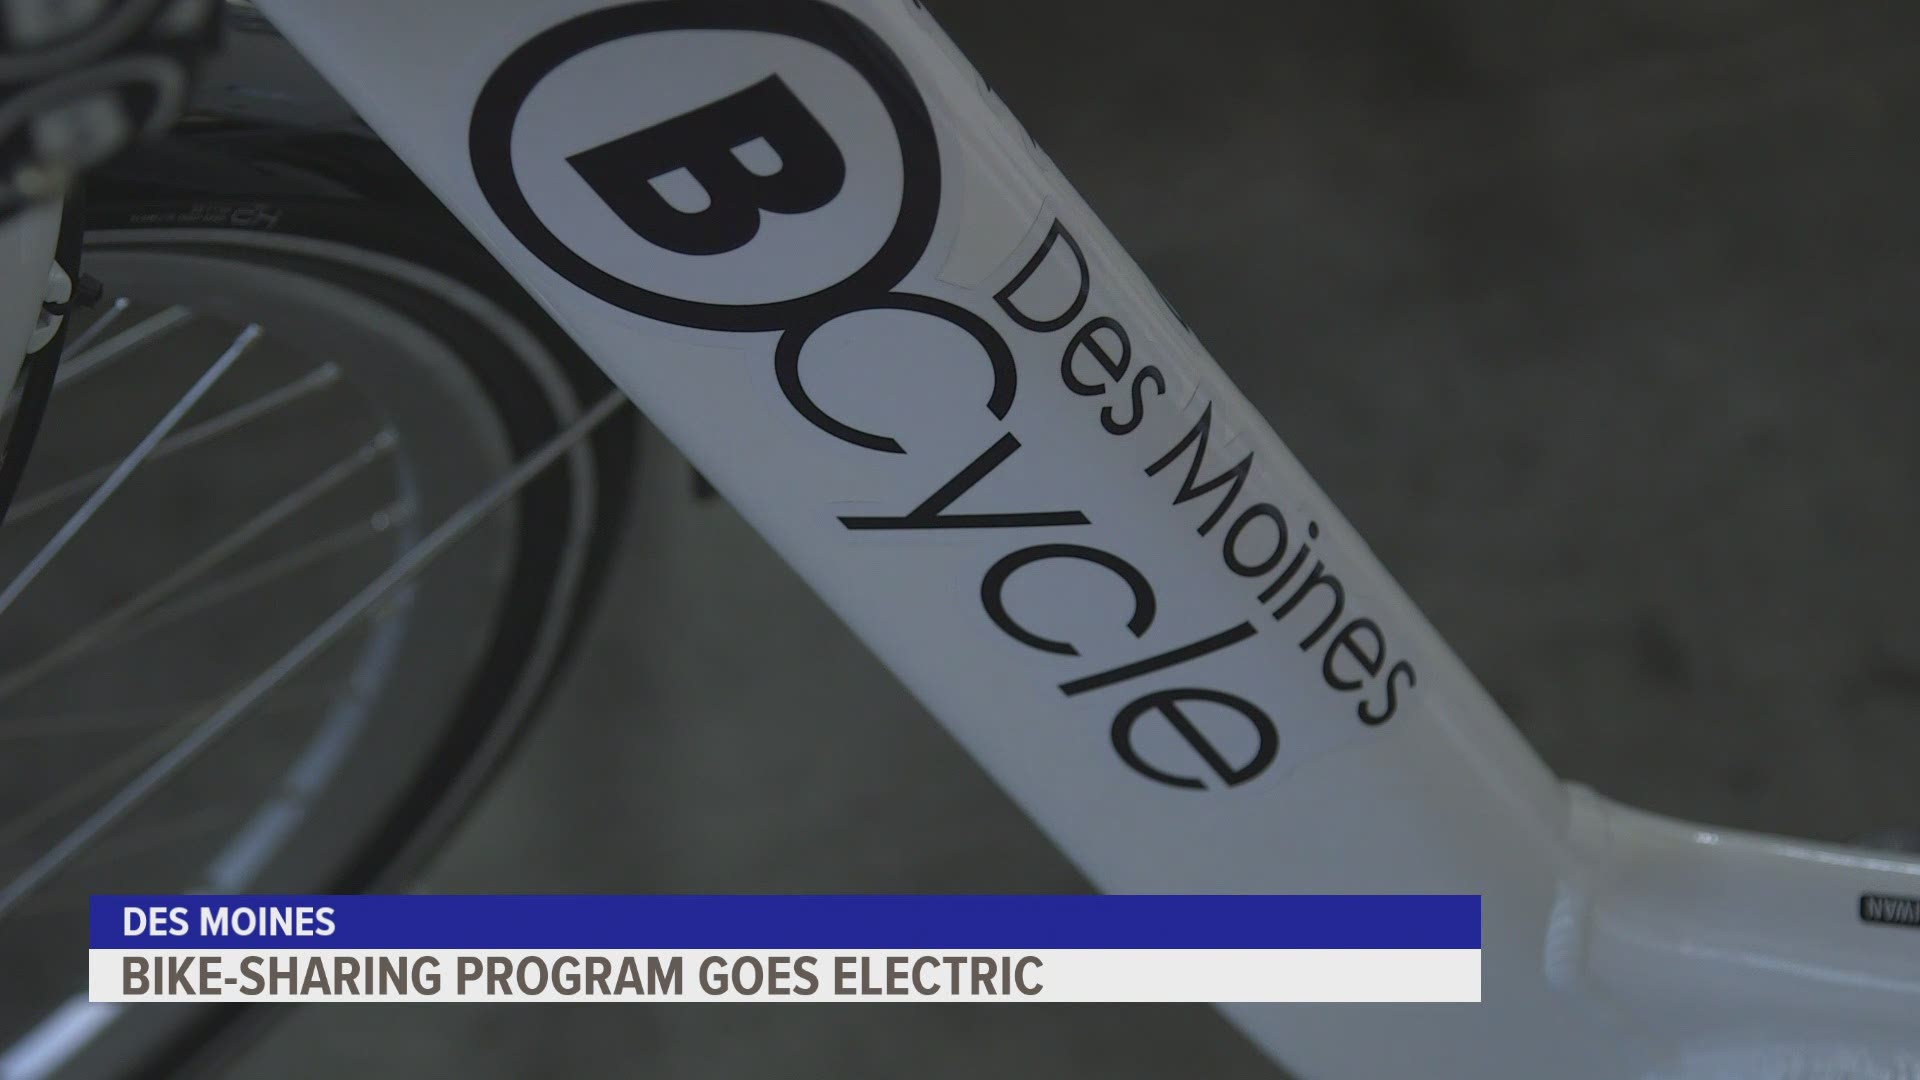 BCycle is adding 65 electric bikes to its fleet, hopes to help those with mobility issues to ride long distances.